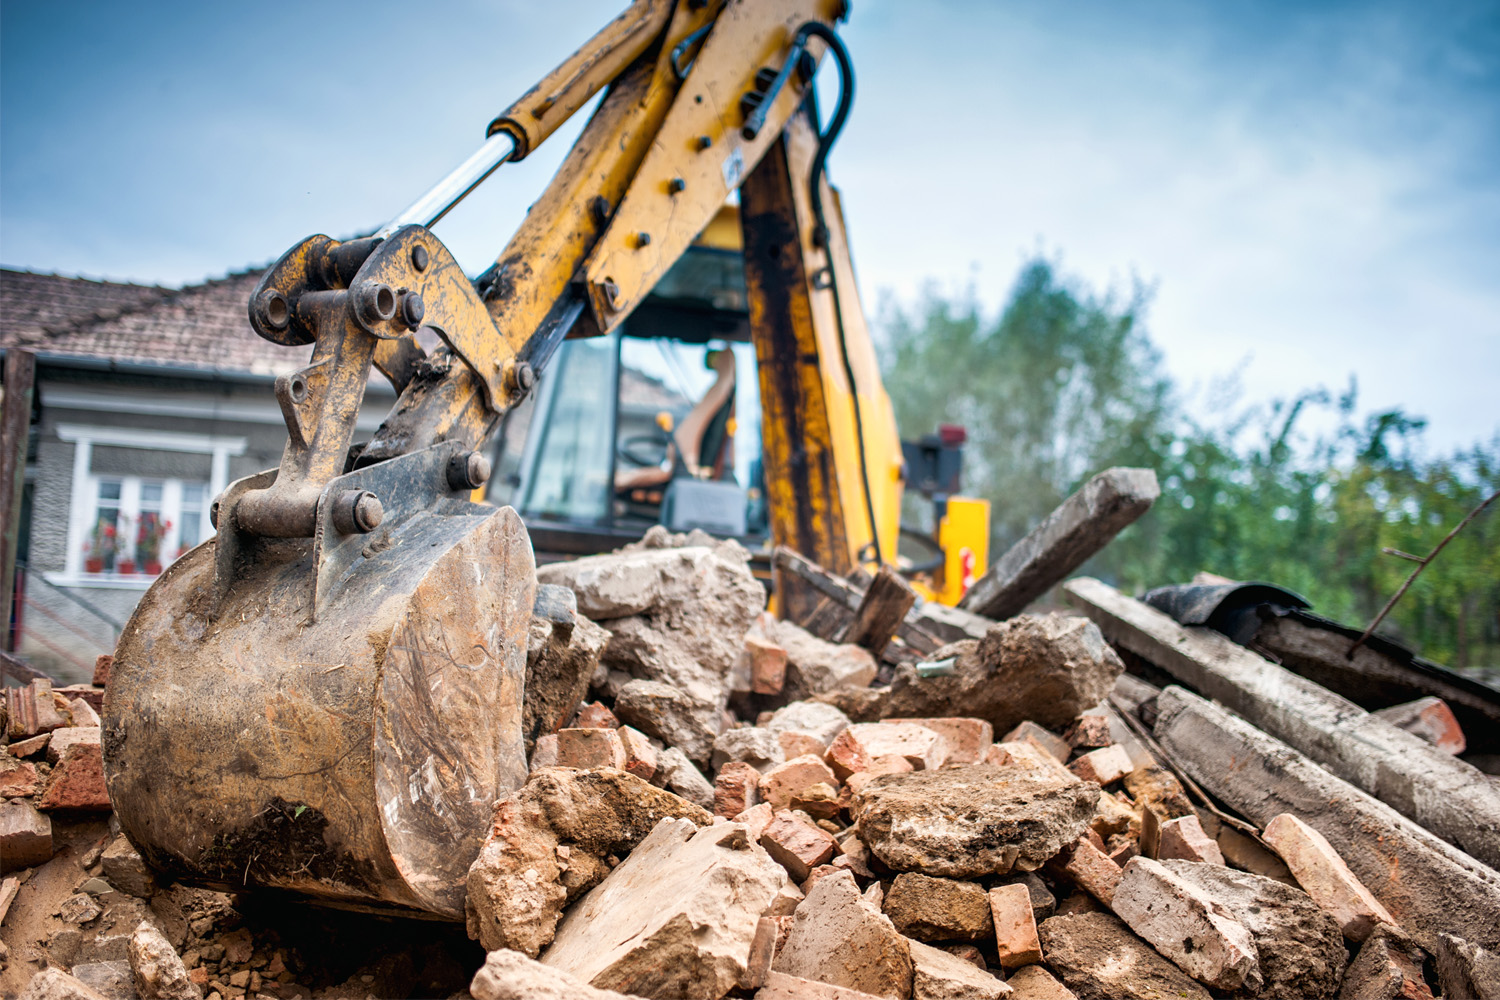 Organisation of the process of debris management in municipalities: first steps to be taken